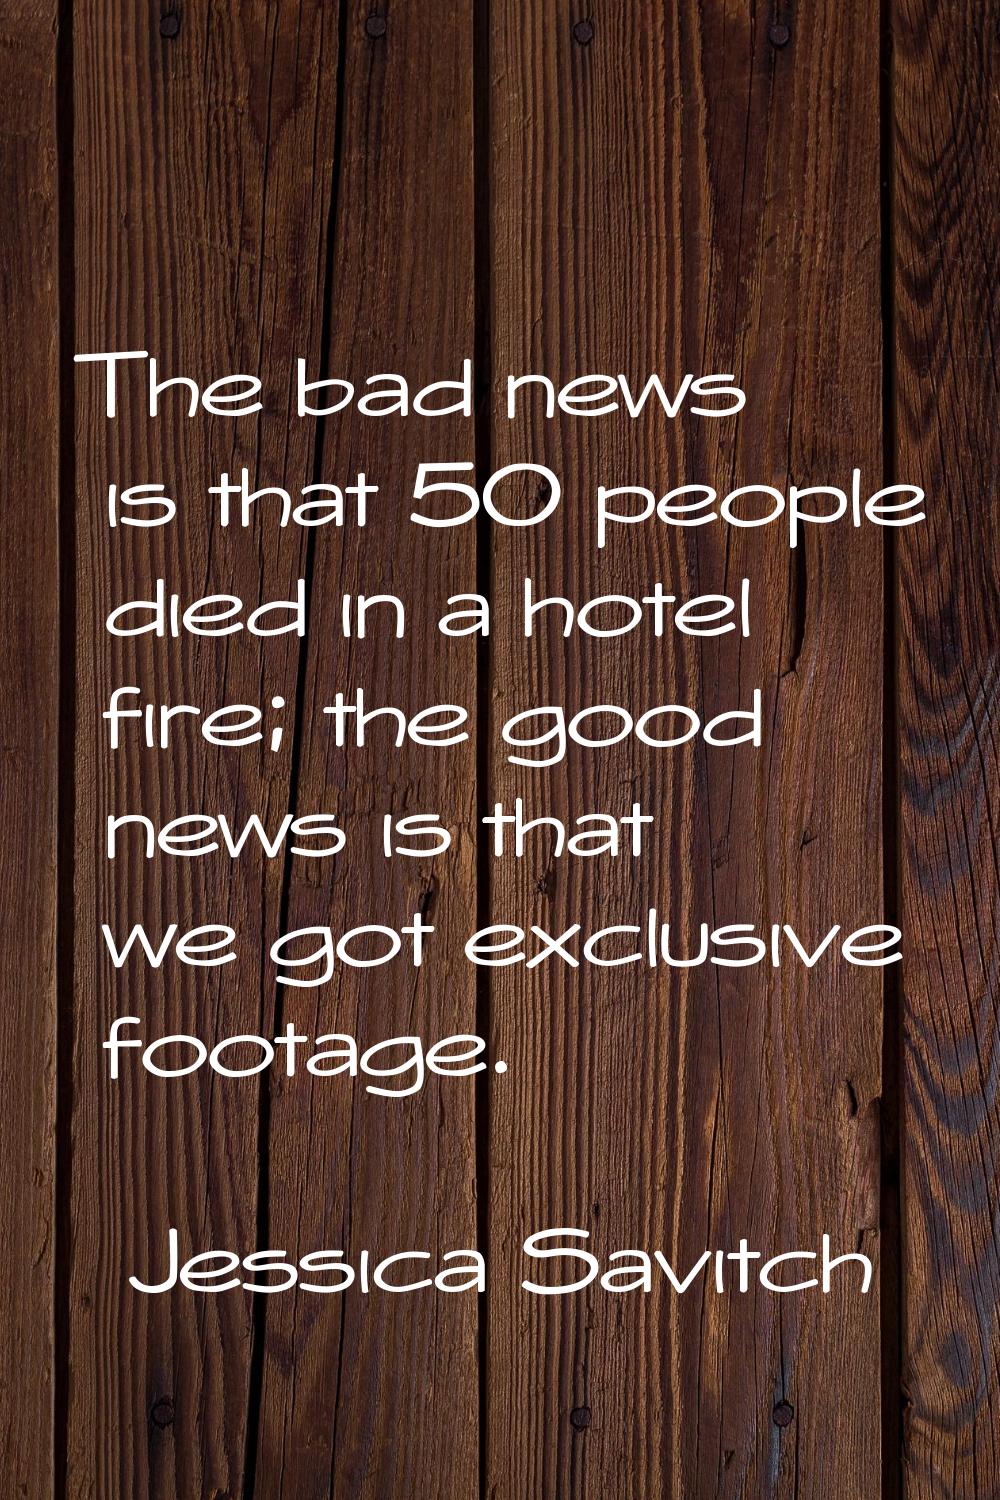 The bad news is that 50 people died in a hotel fire; the good news is that we got exclusive footage